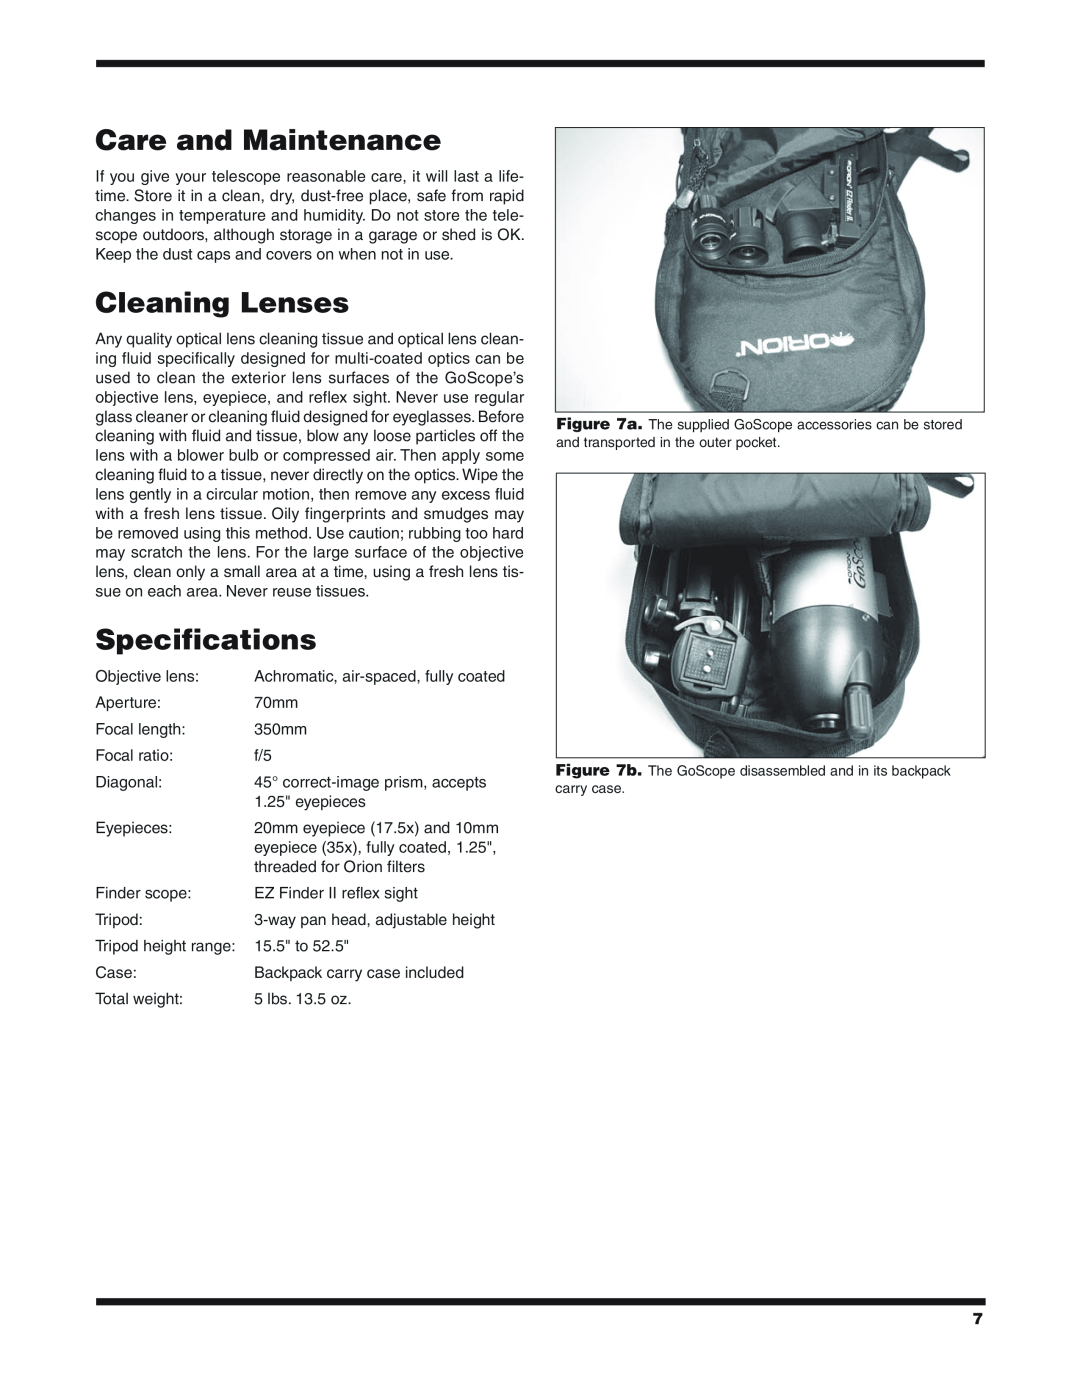 Orion 70 instruction manual Care and Maintenance, Cleaning Lenses, Specifications 